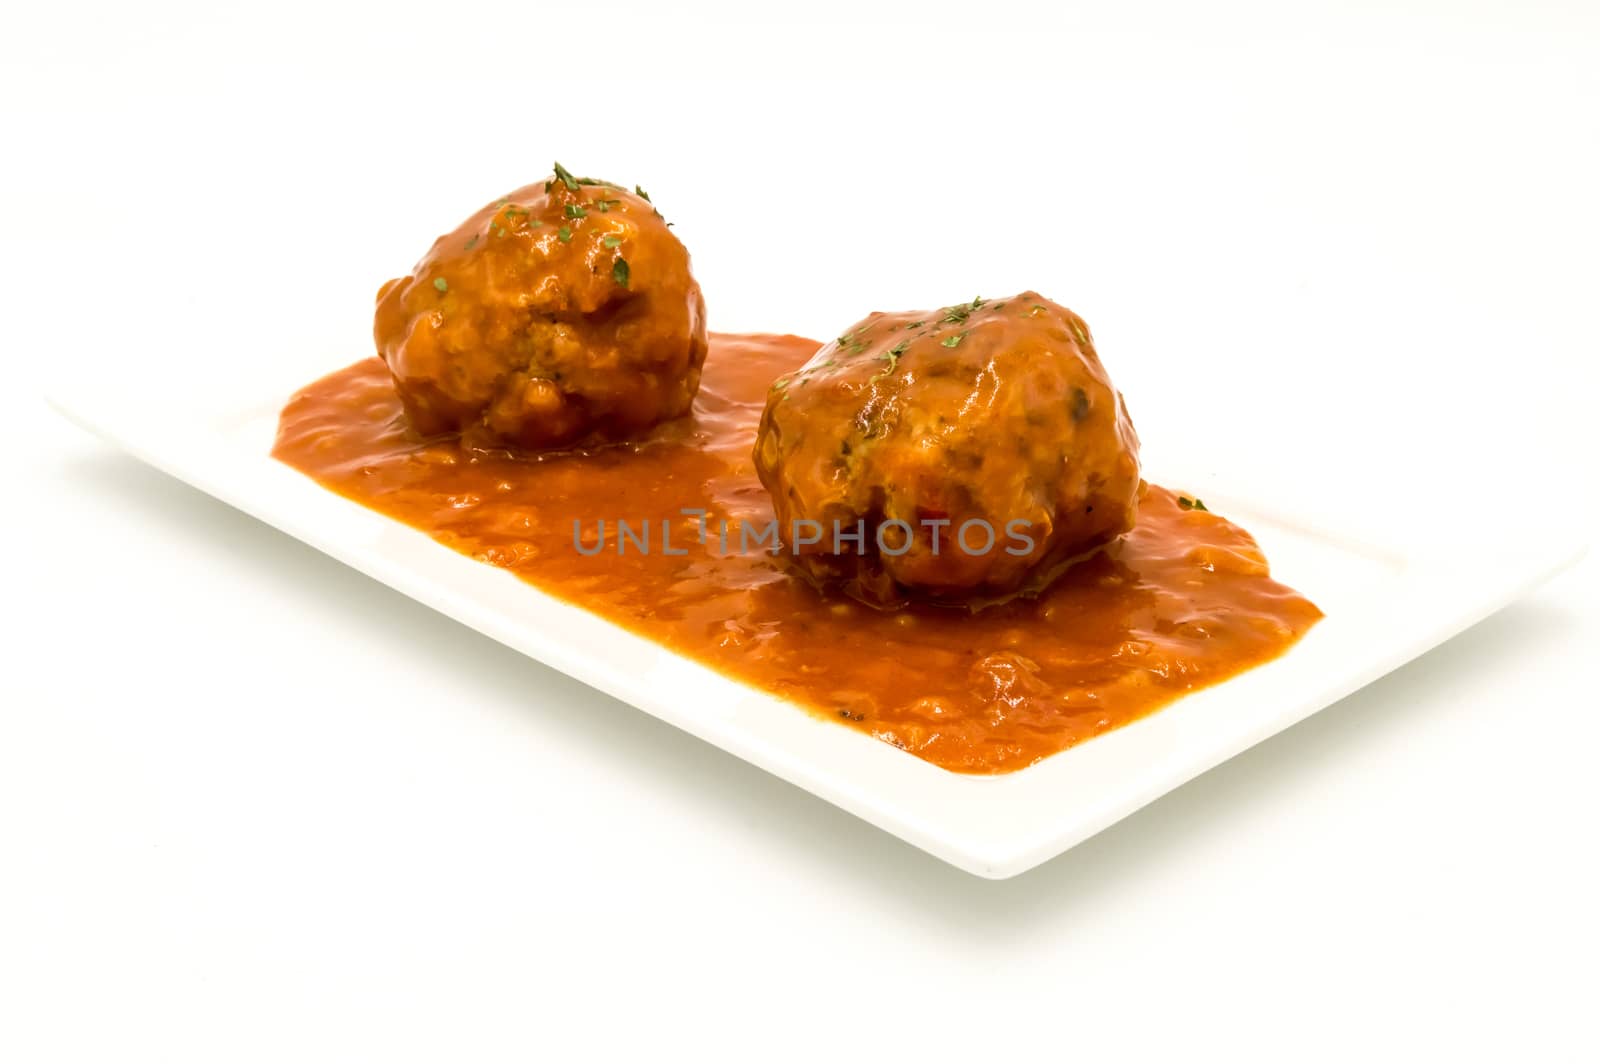 Meatballs cooked in tomato sauce  by Philou1000